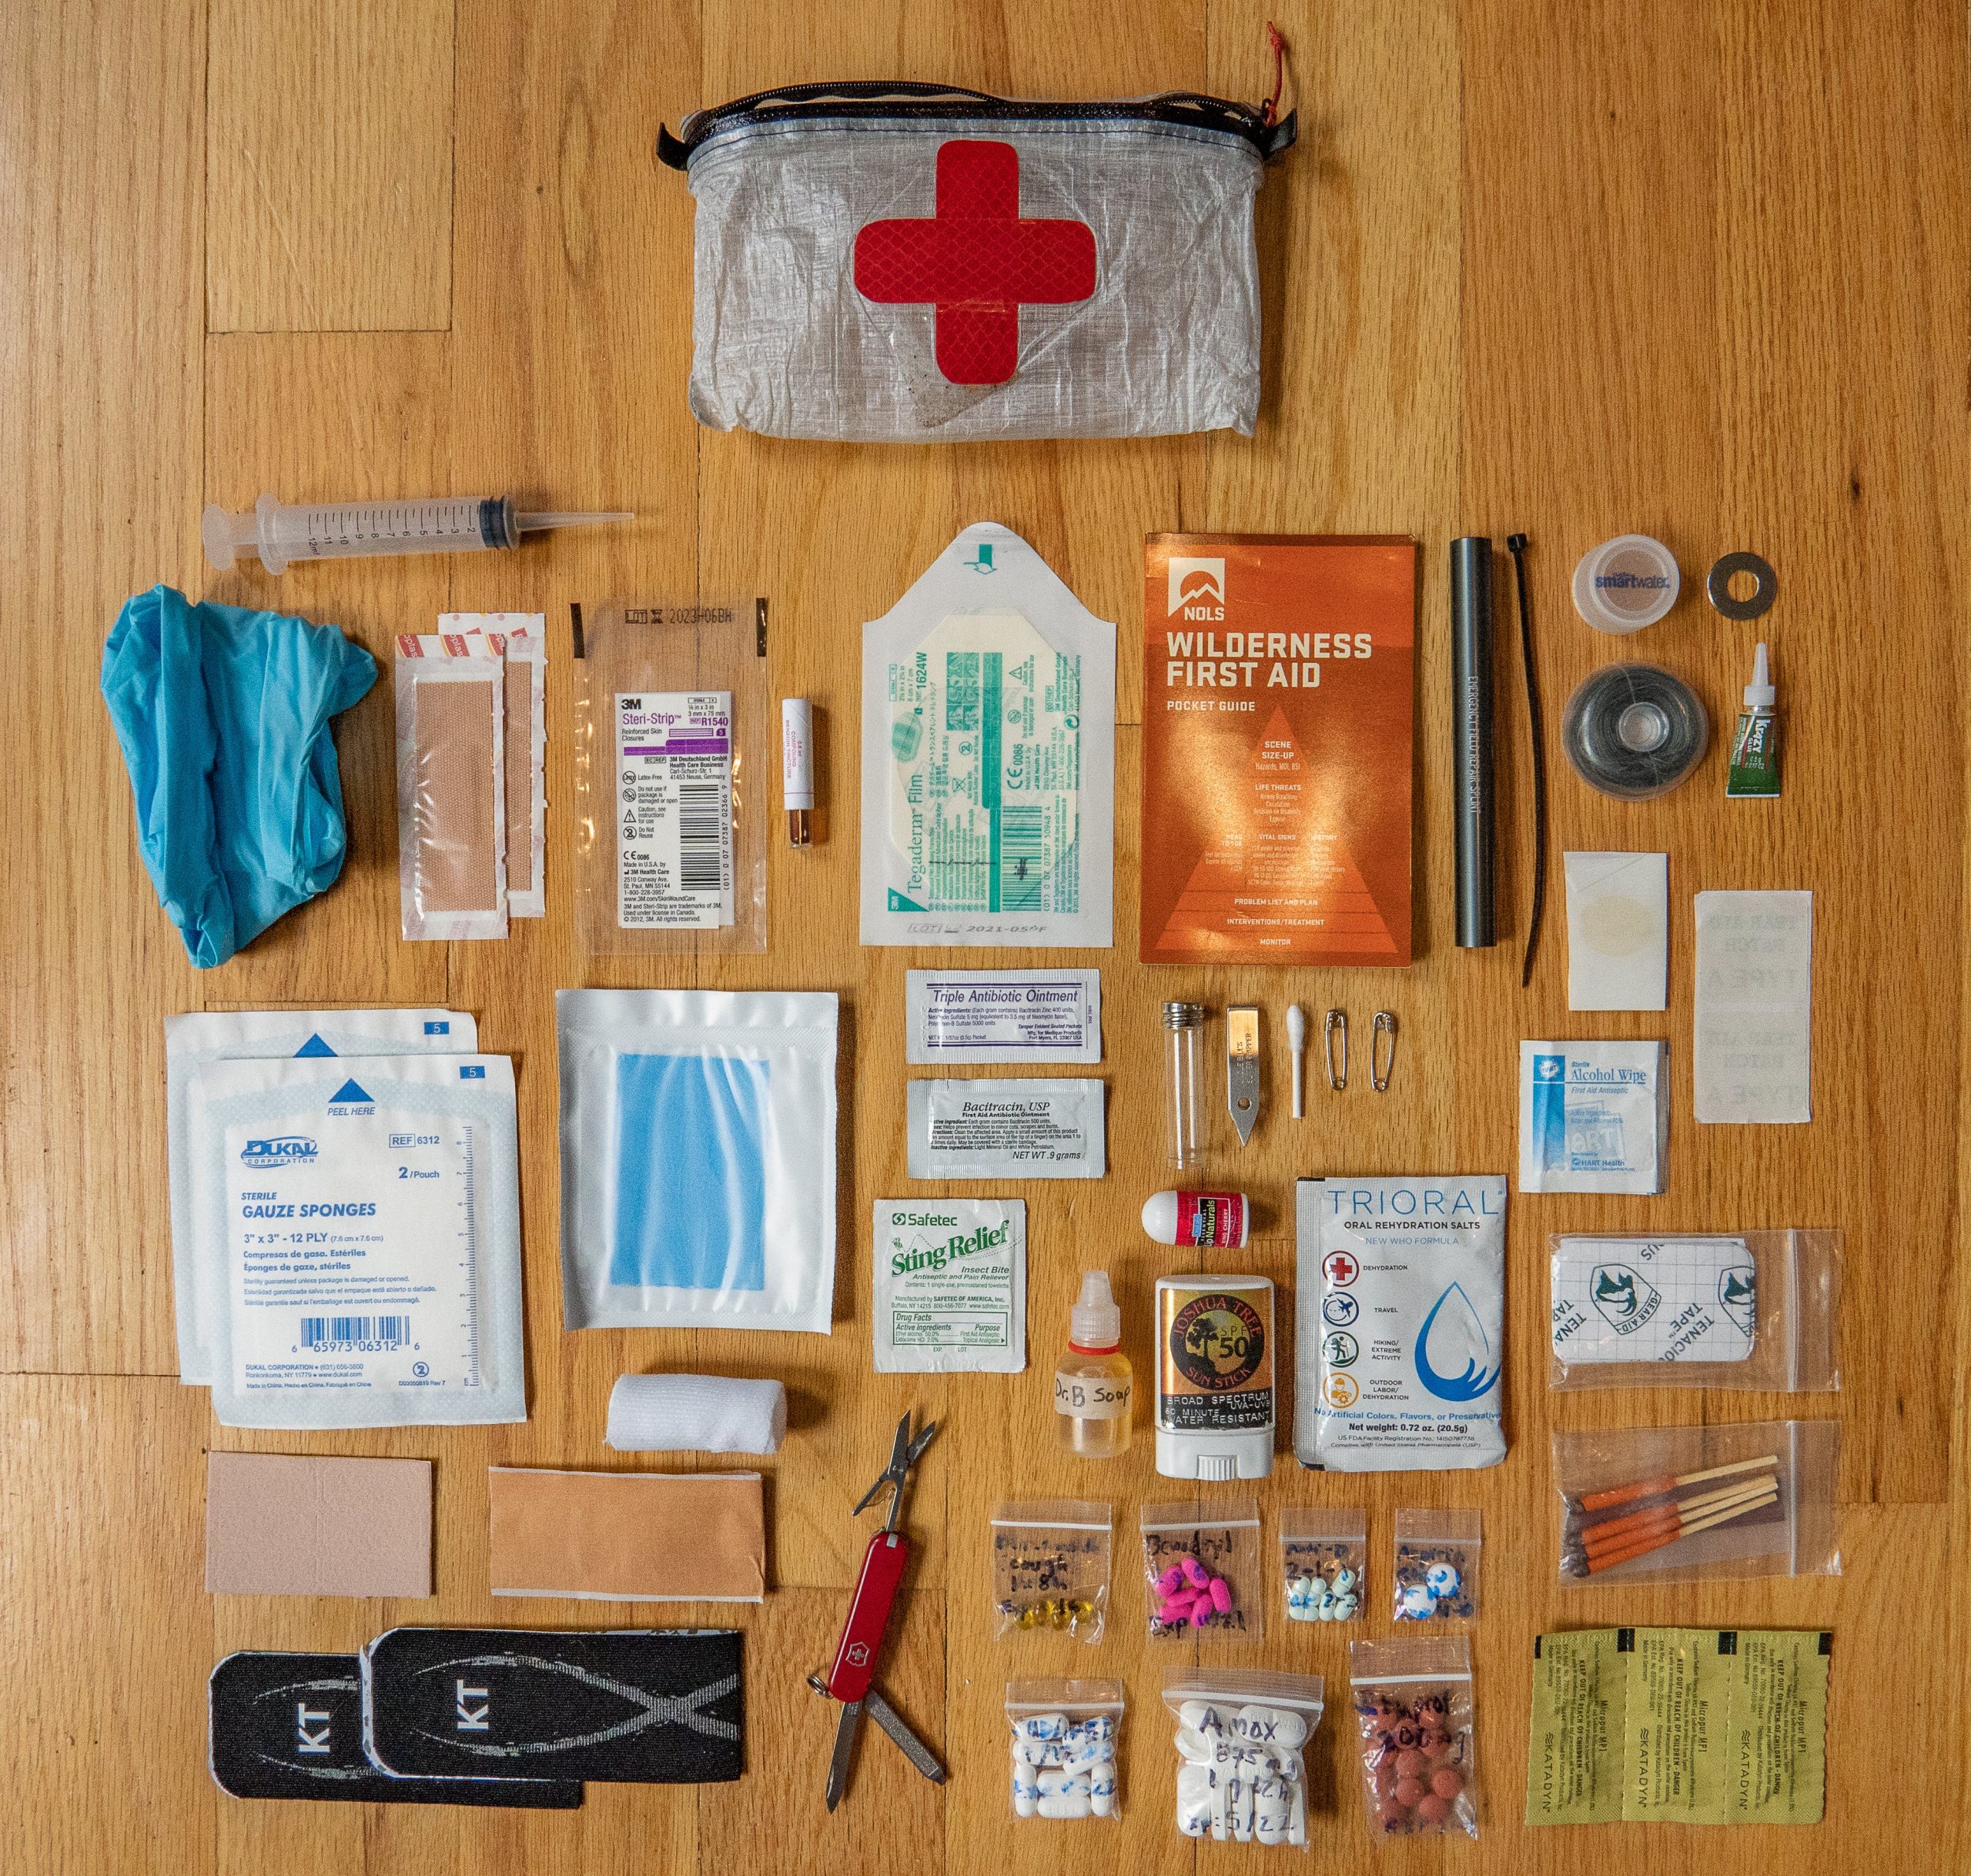 10 Best First Aid Kits For Travel Review - The Jerusalem Post